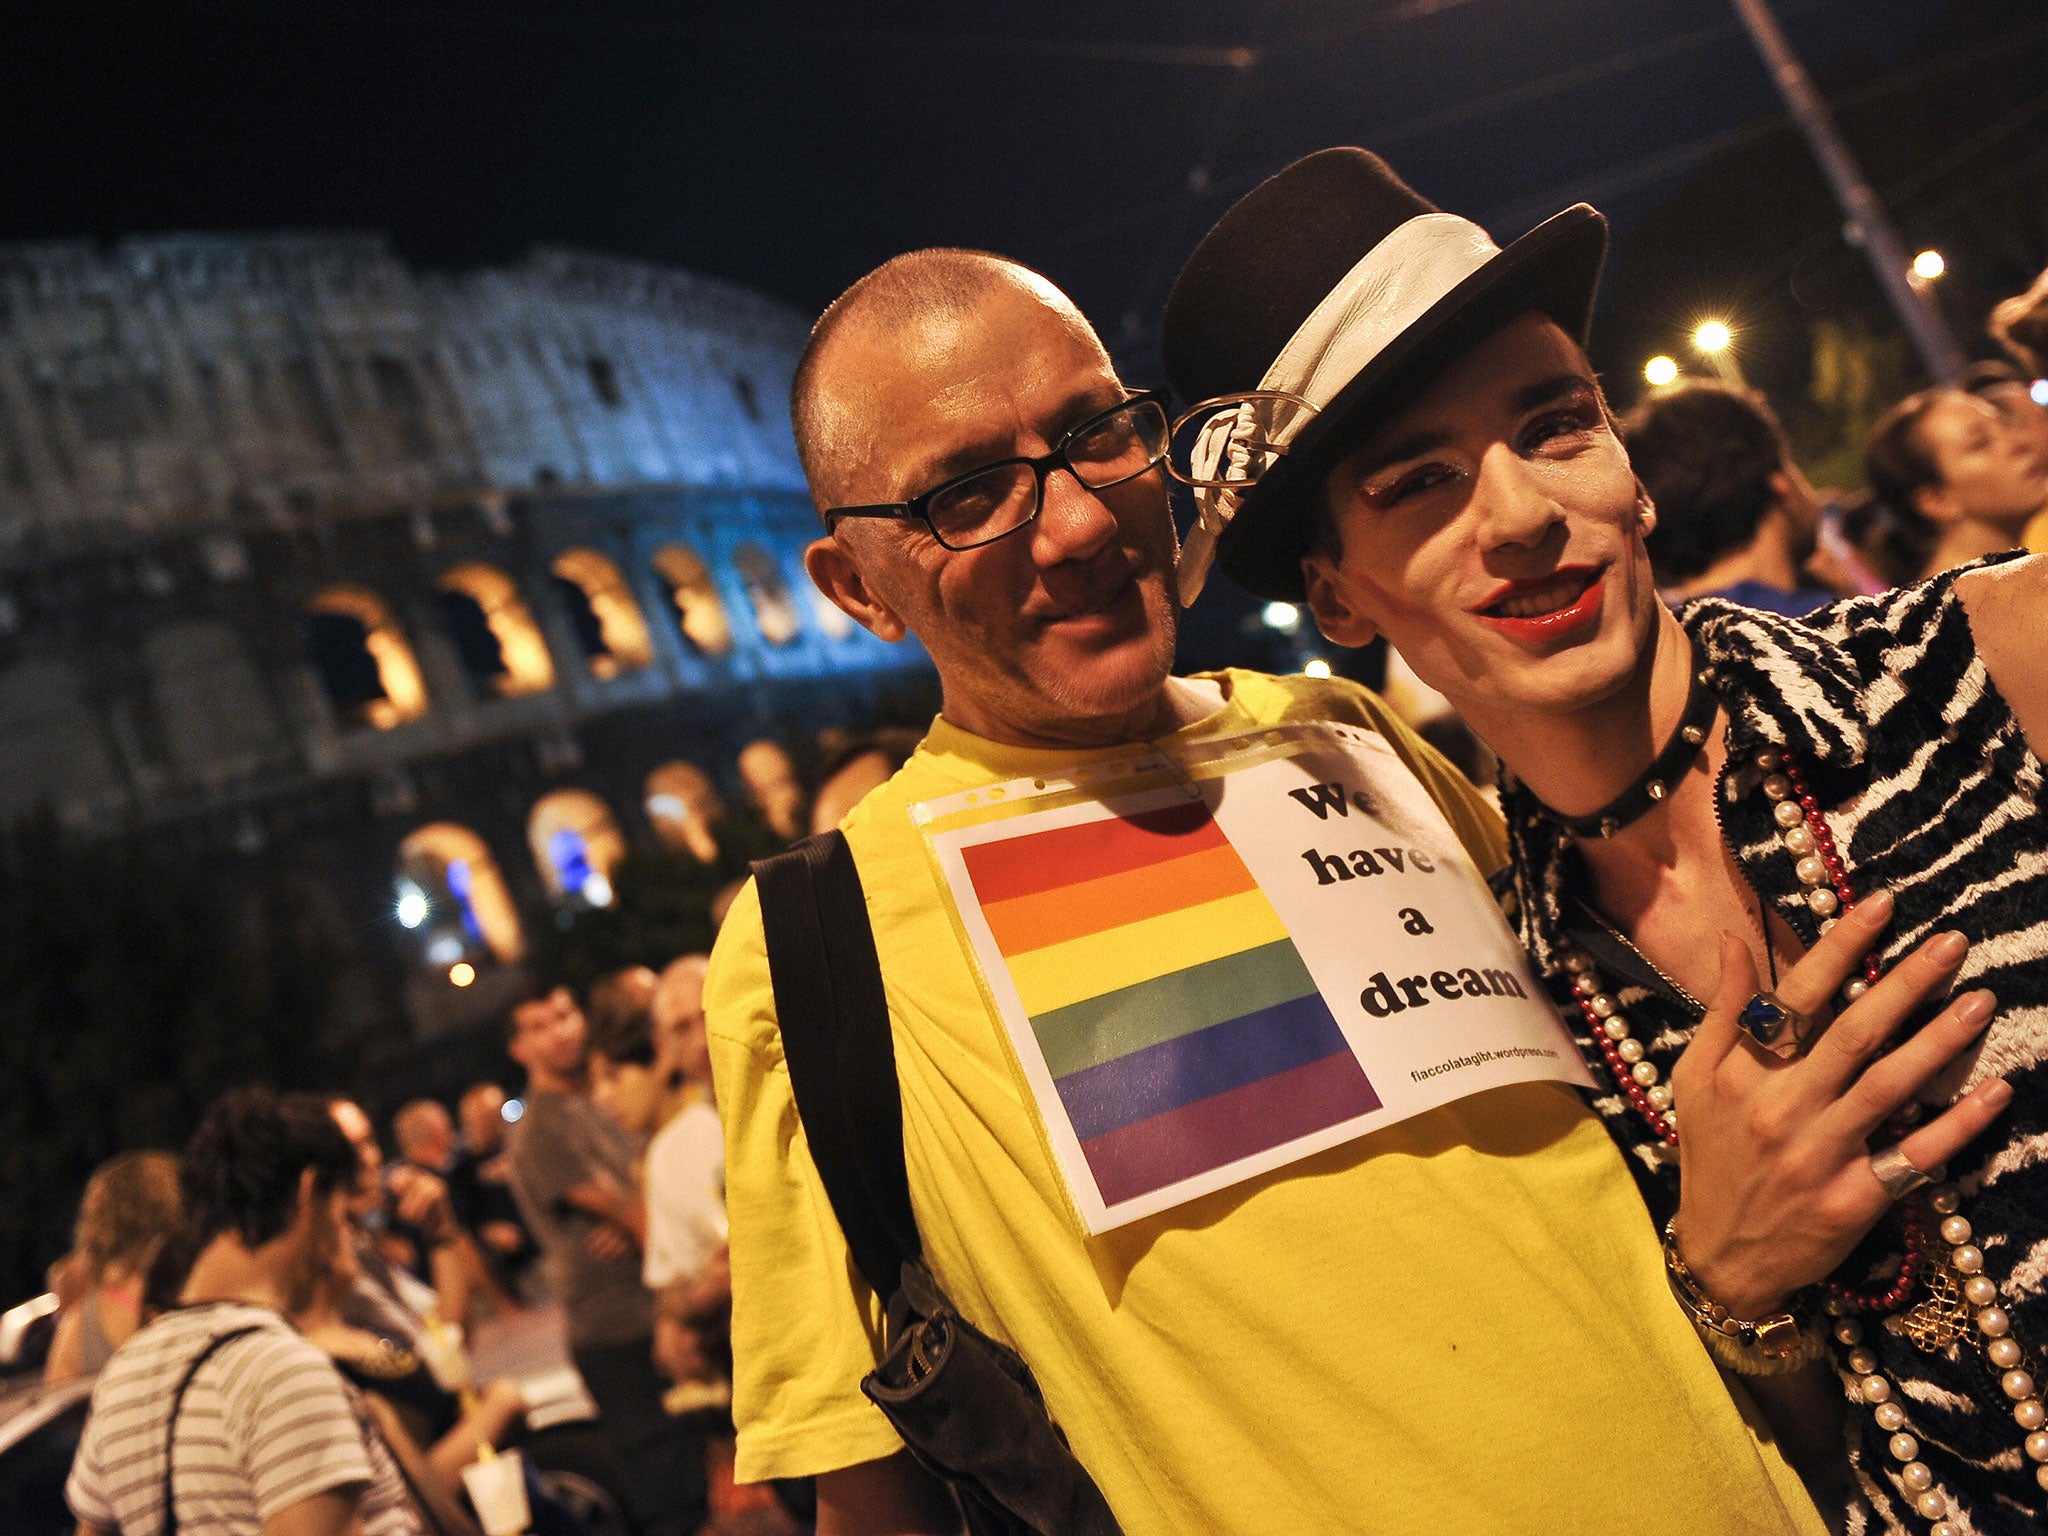 Italian gay rights supporters outside the Colosseum during a protest in 2009 against an increasing number of homophobic attacks